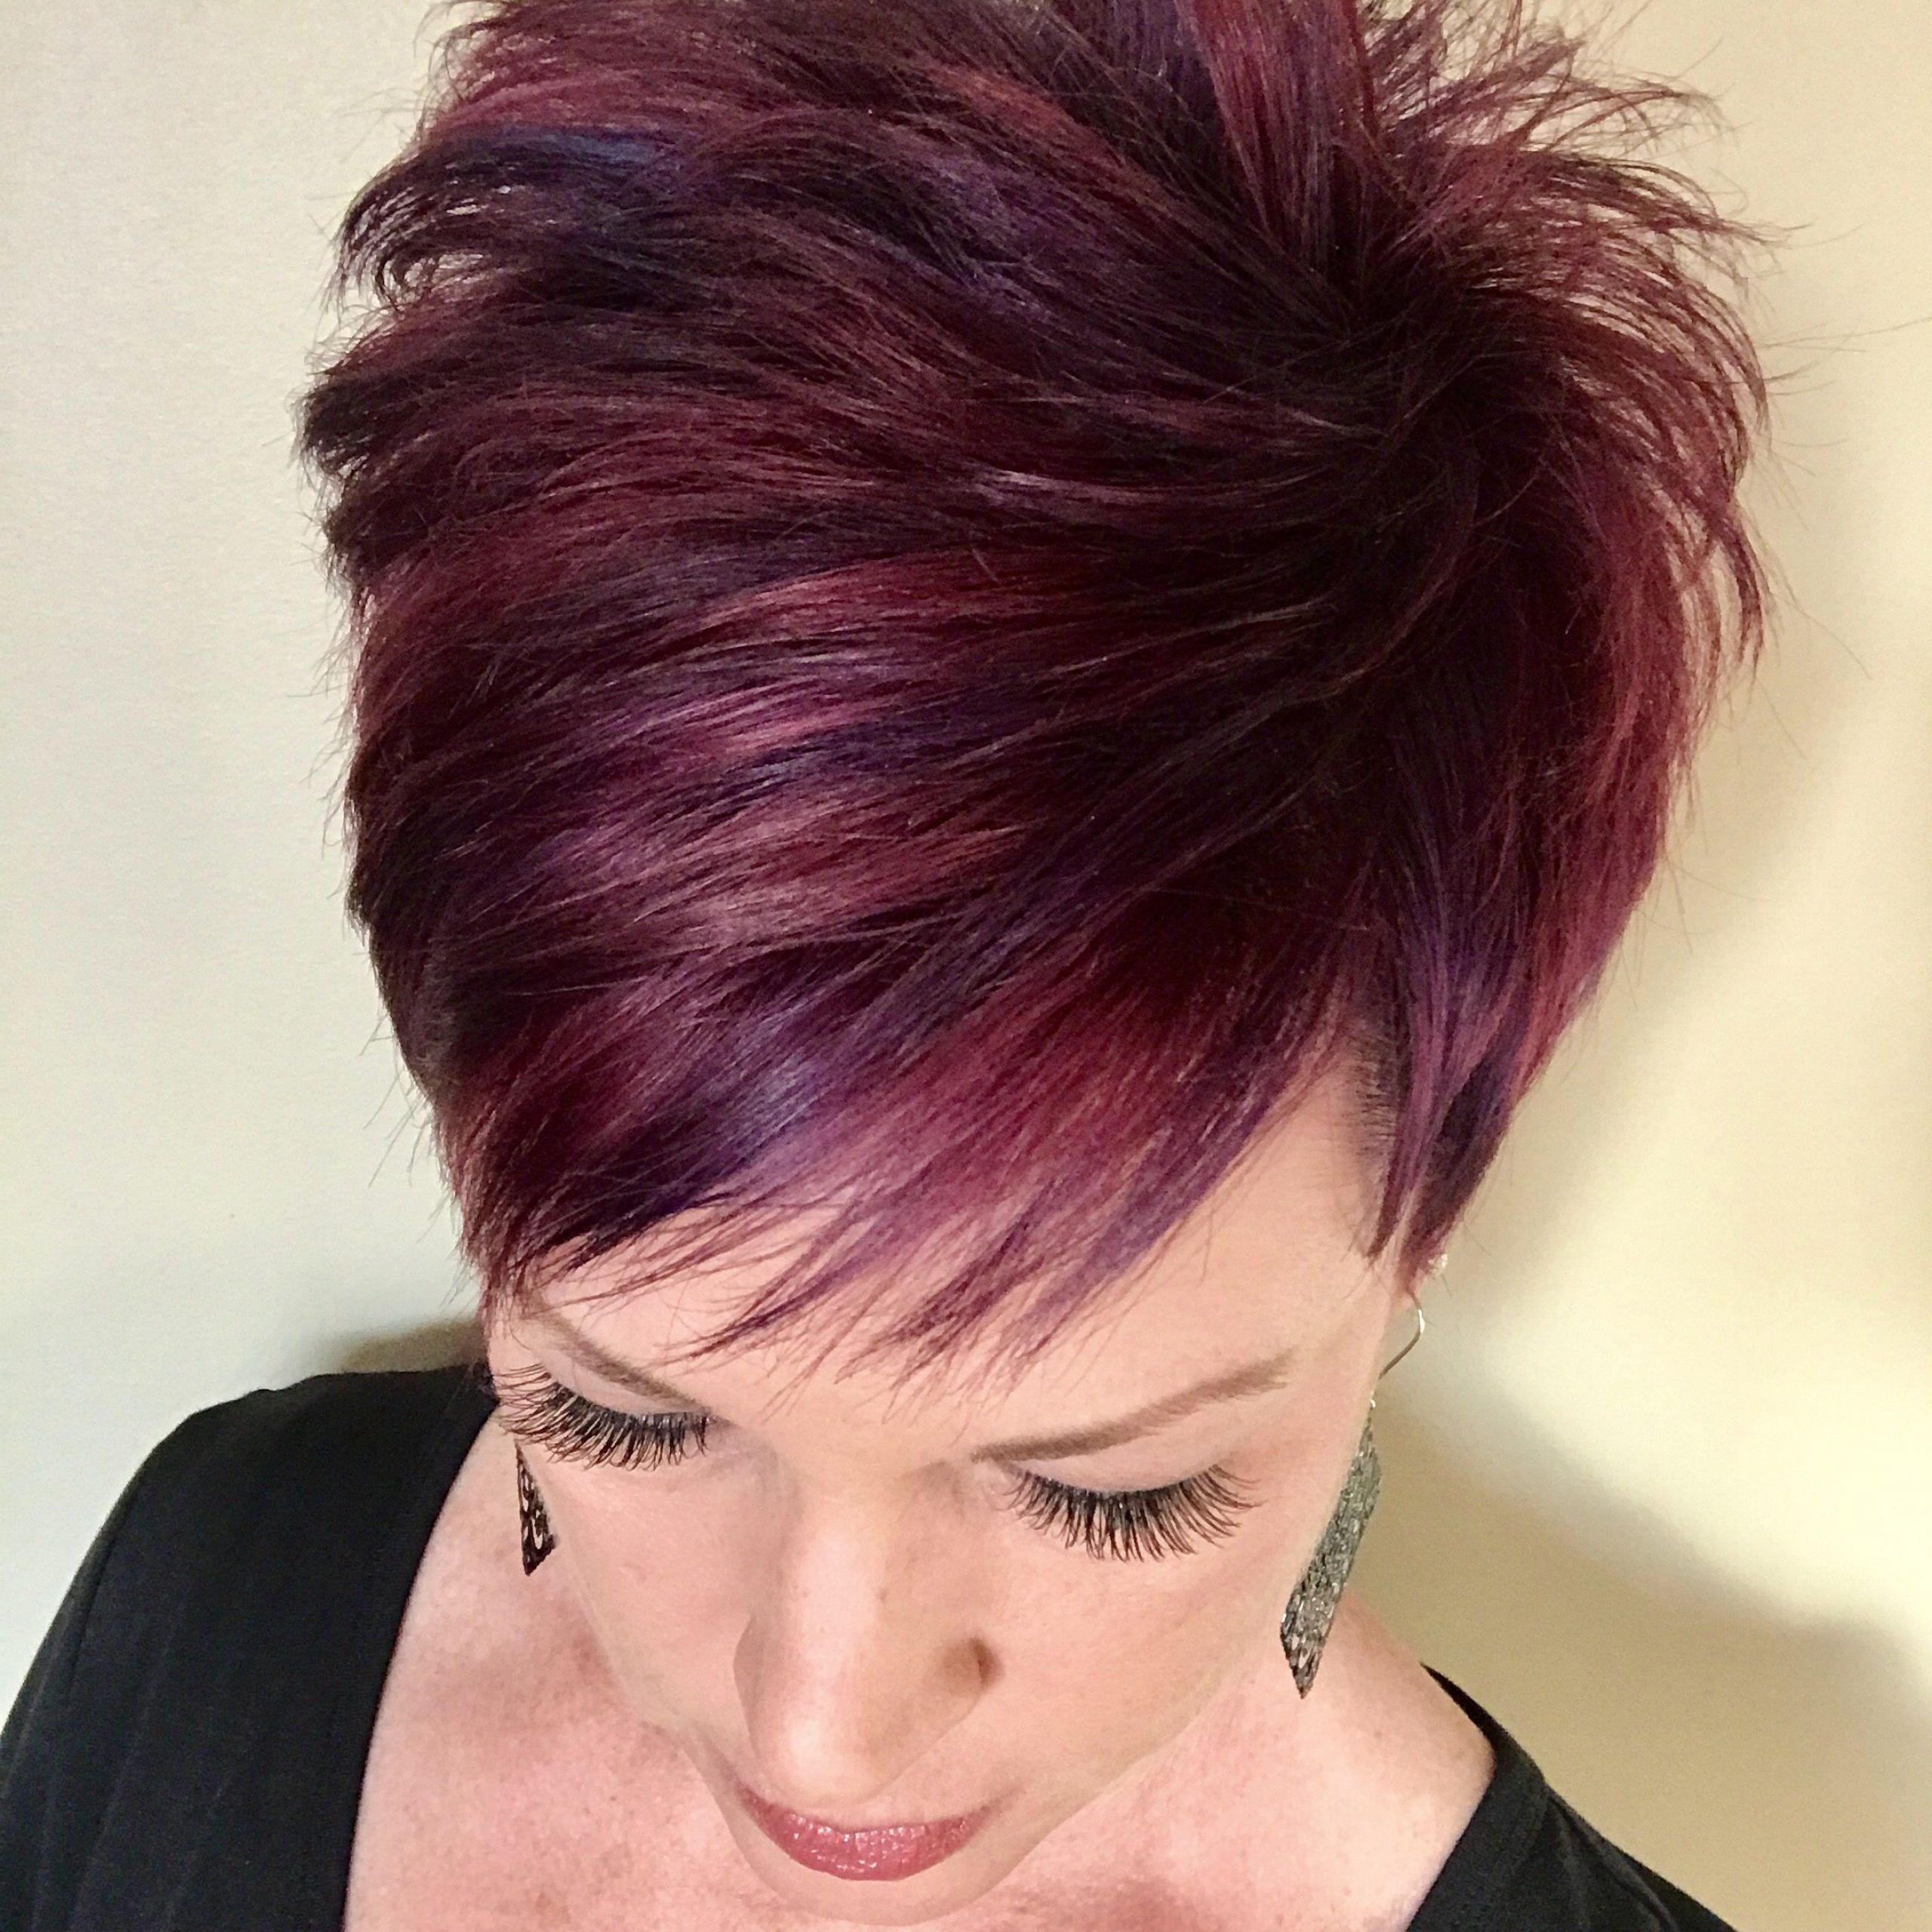 Short Red Hair, Spiked Hair, Short Hair In Famous Plum Pixie Hairstyles (View 7 of 20)